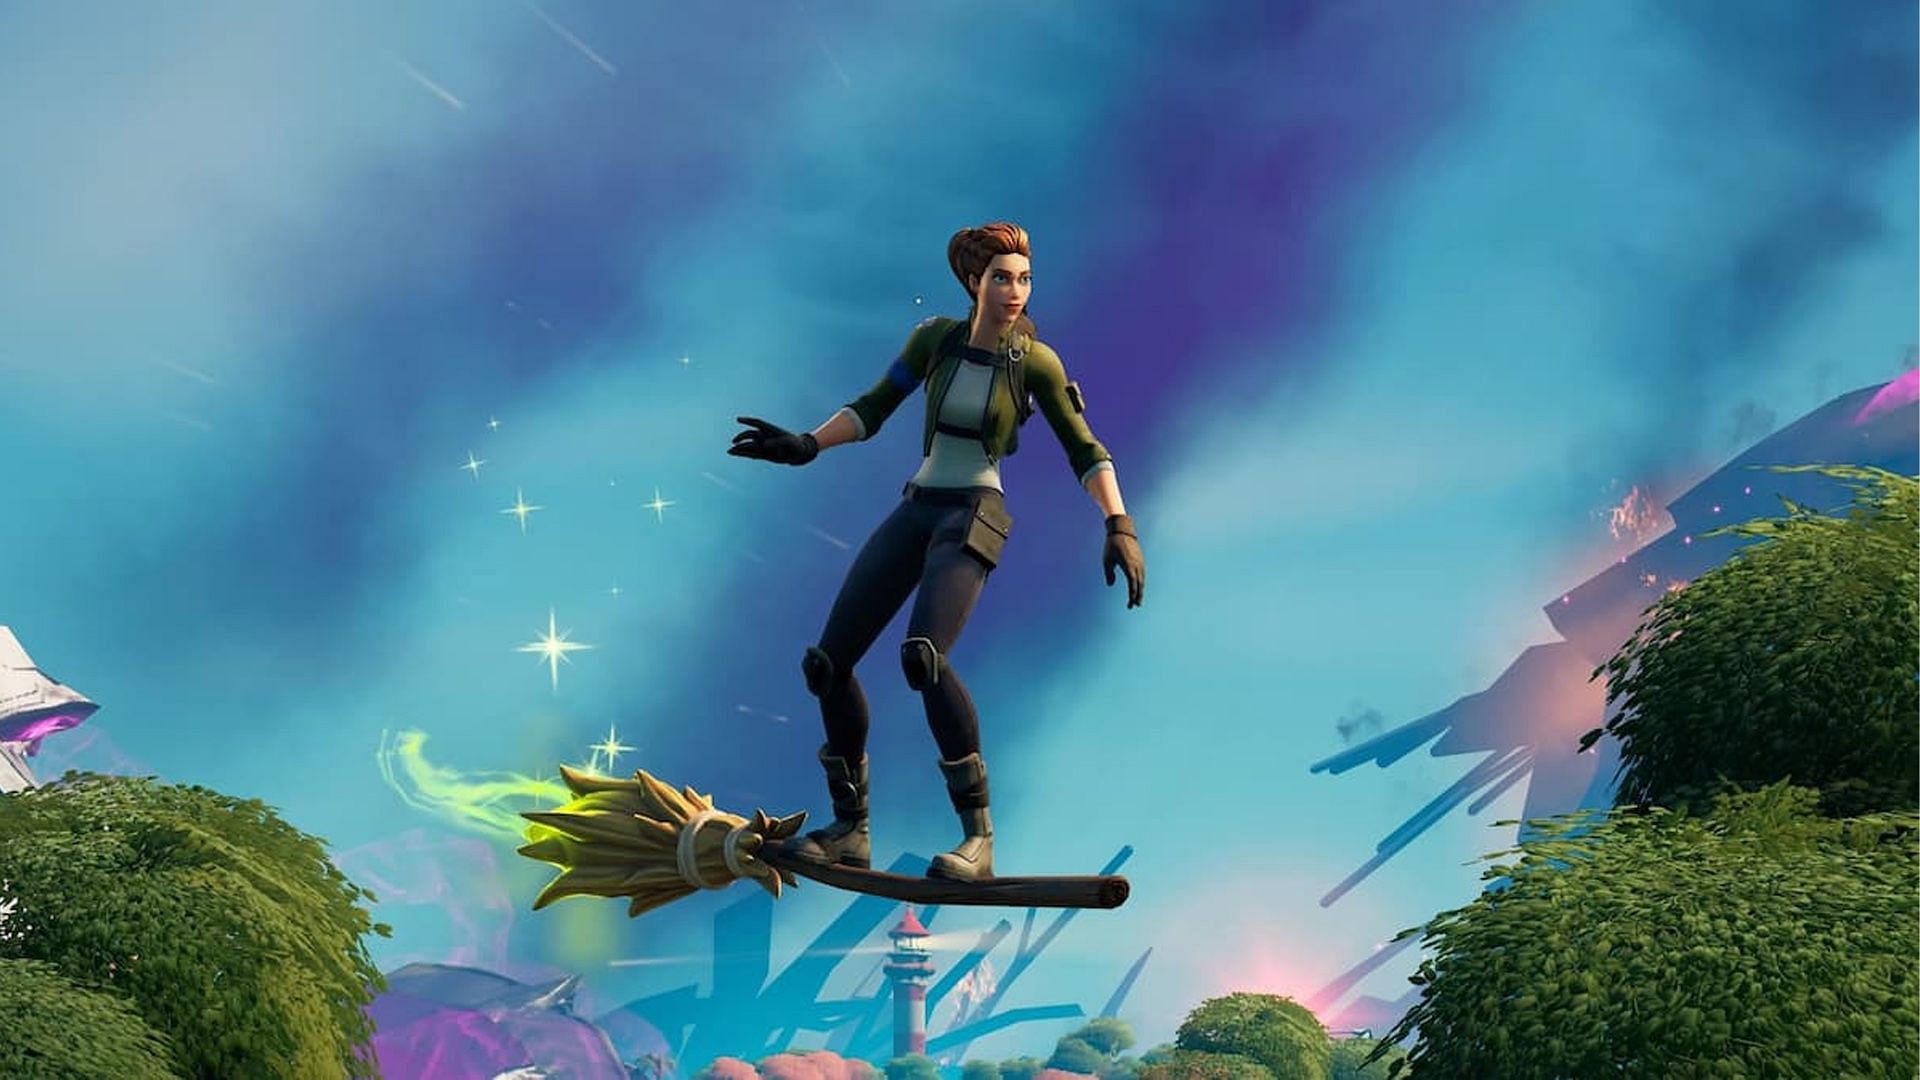 Witch Broom is a popular Mythic item in Fortnite Battle Royale (Image via Epic Games)